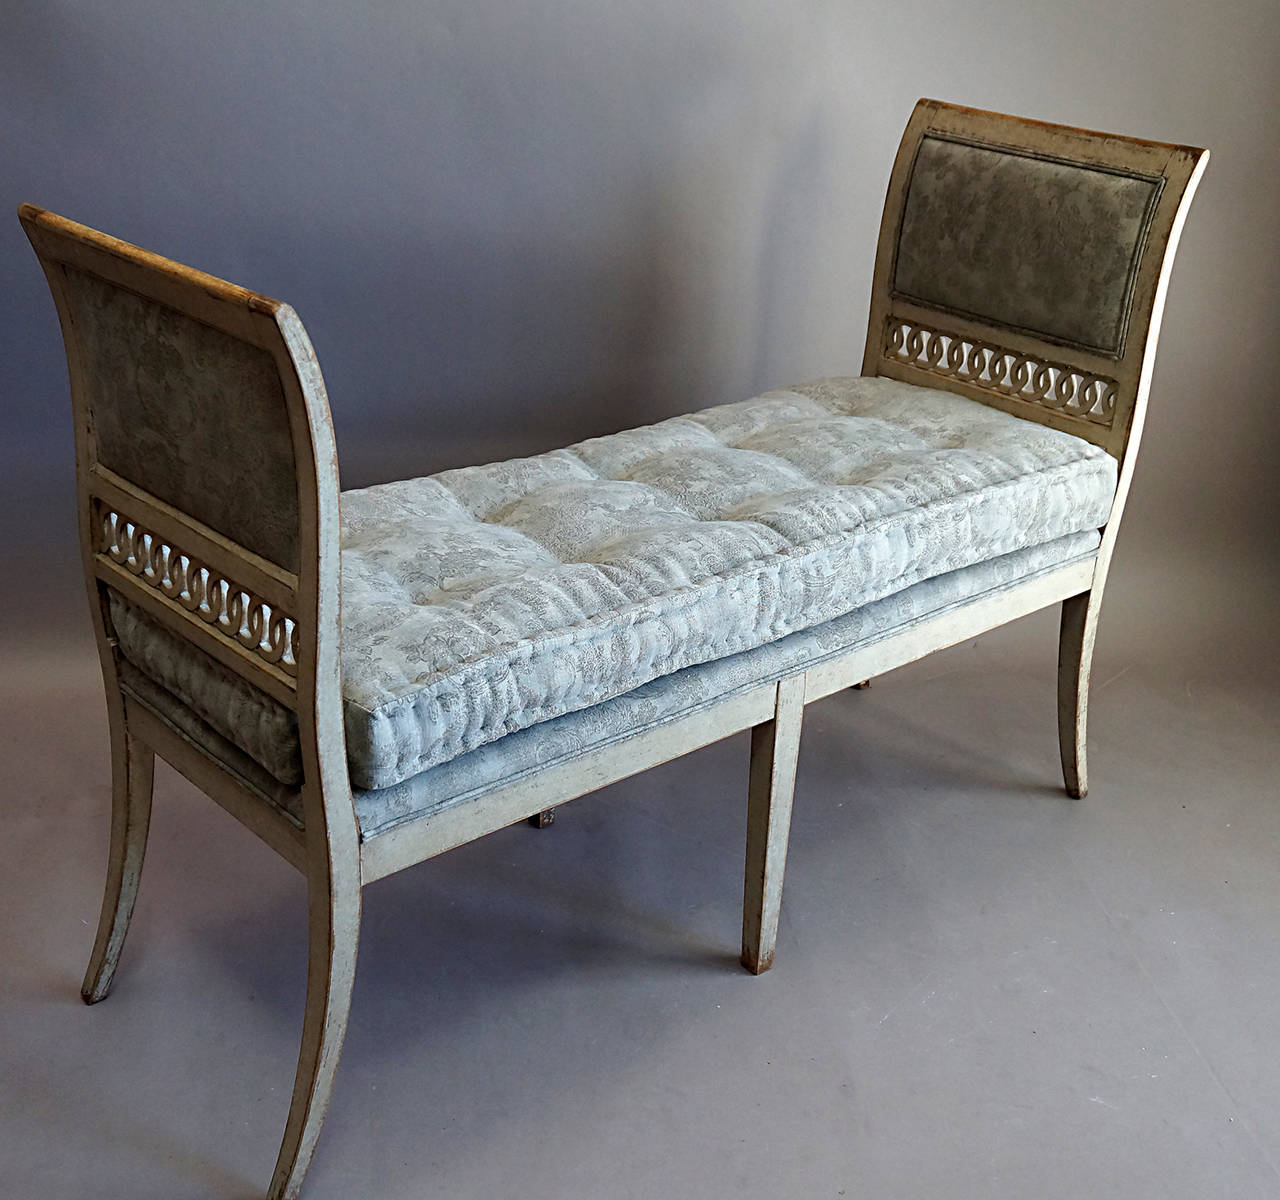 Gustavian window bench with curved, upholstered arms with pierced detail extending into saber legs. The arms and the loose cushion are newly covered with a beautiful gray printed cotton.